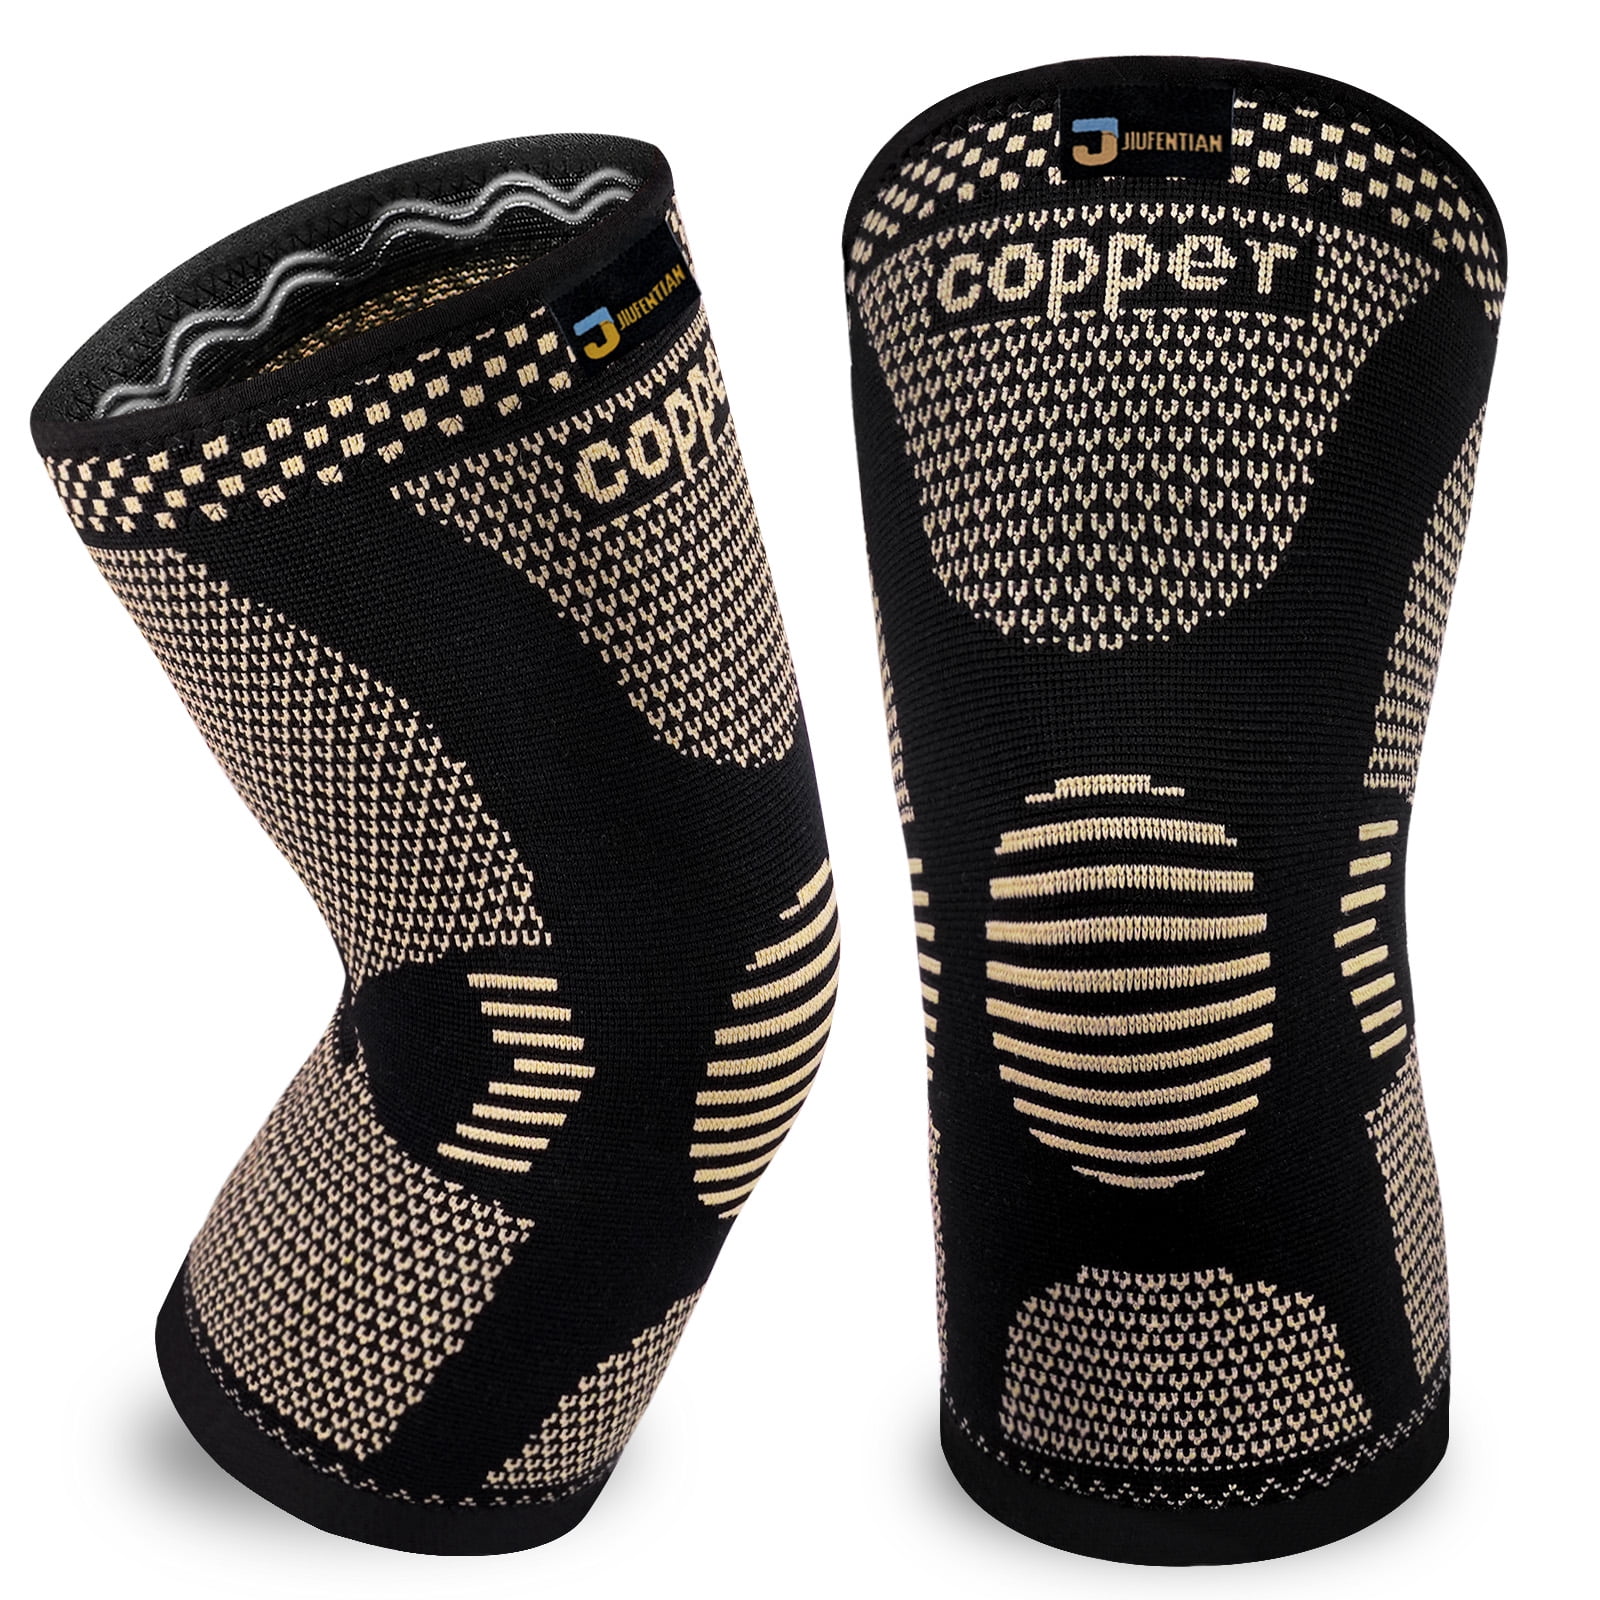 Tommie Copper Knee Brace Compression Sleeve Joint Pain Relief L/XL